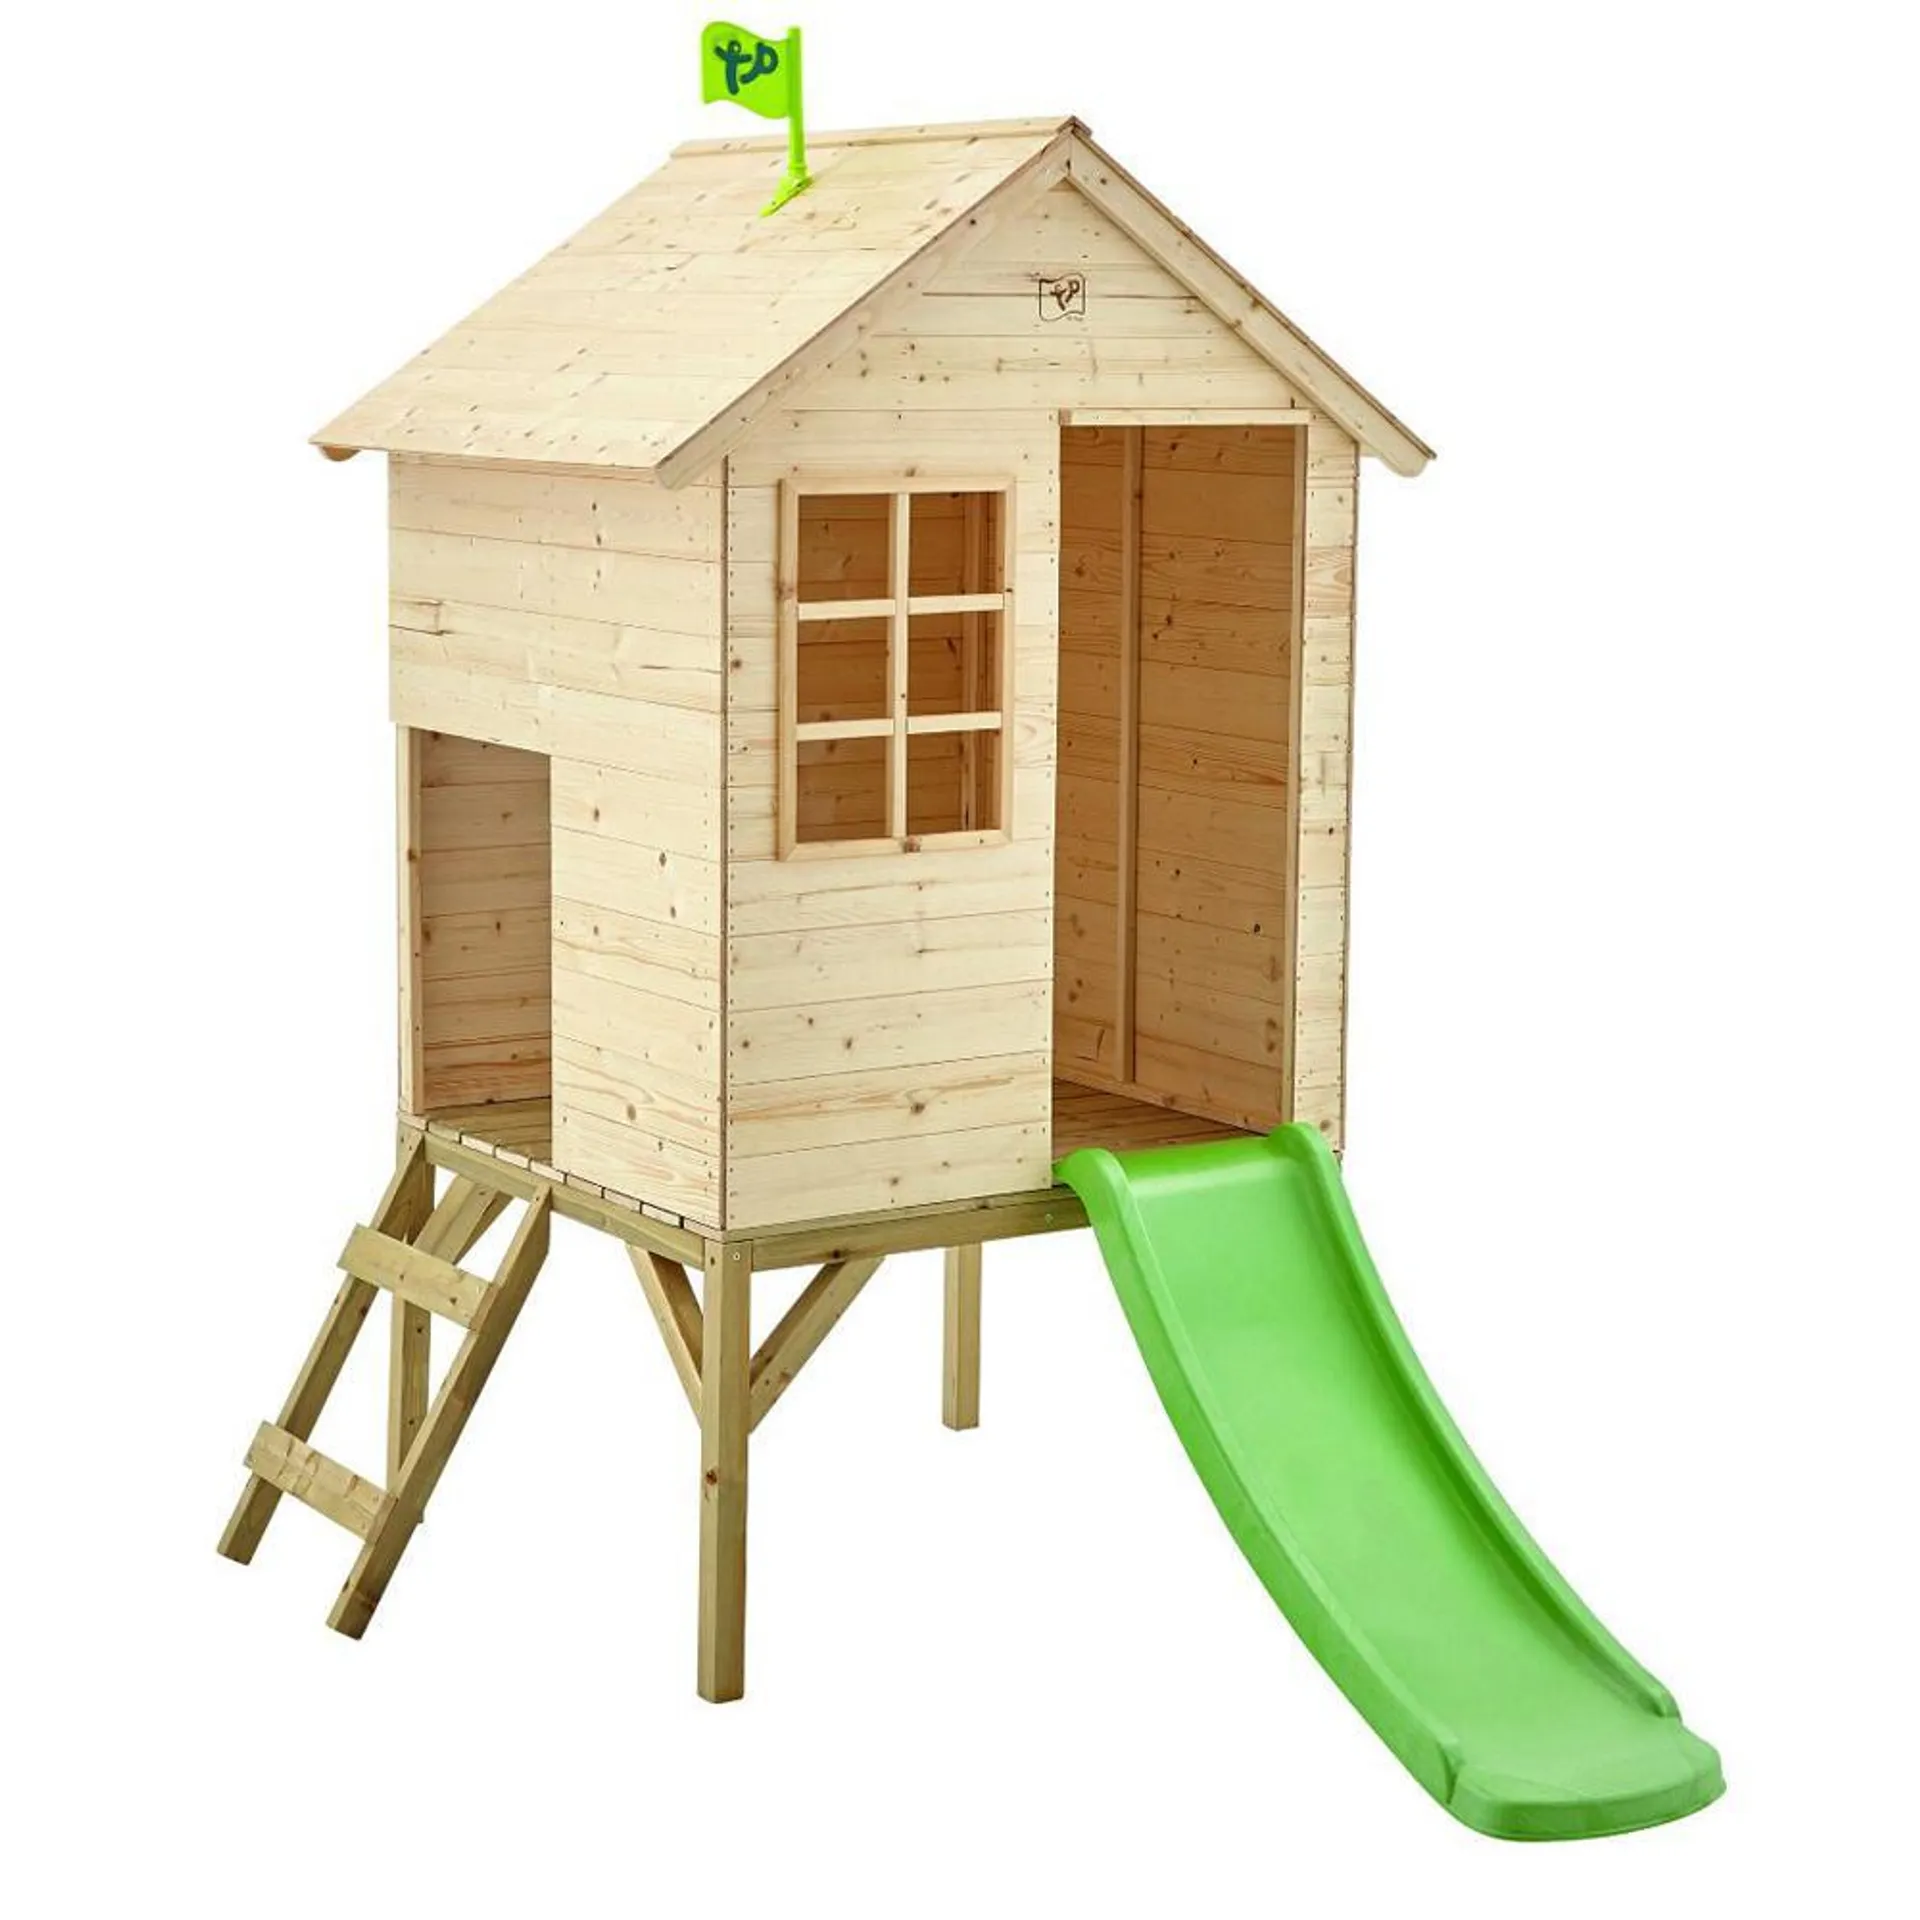 TP Sunnyside Wooden Play House with Slide